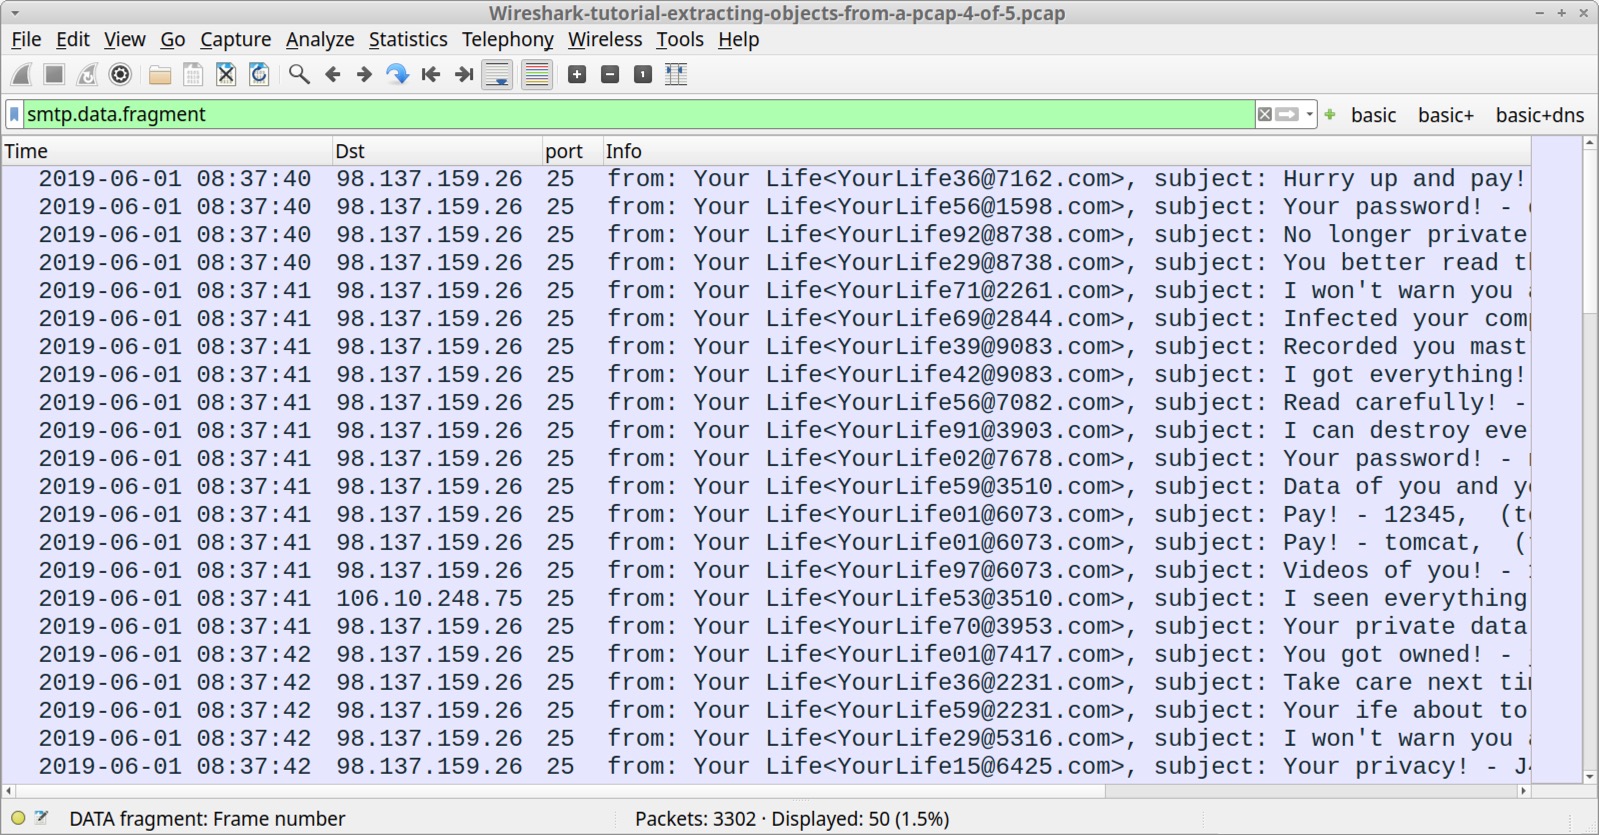 Image 11 is a screenshot of Wireshark with the filter set to smtp.data.fragment.